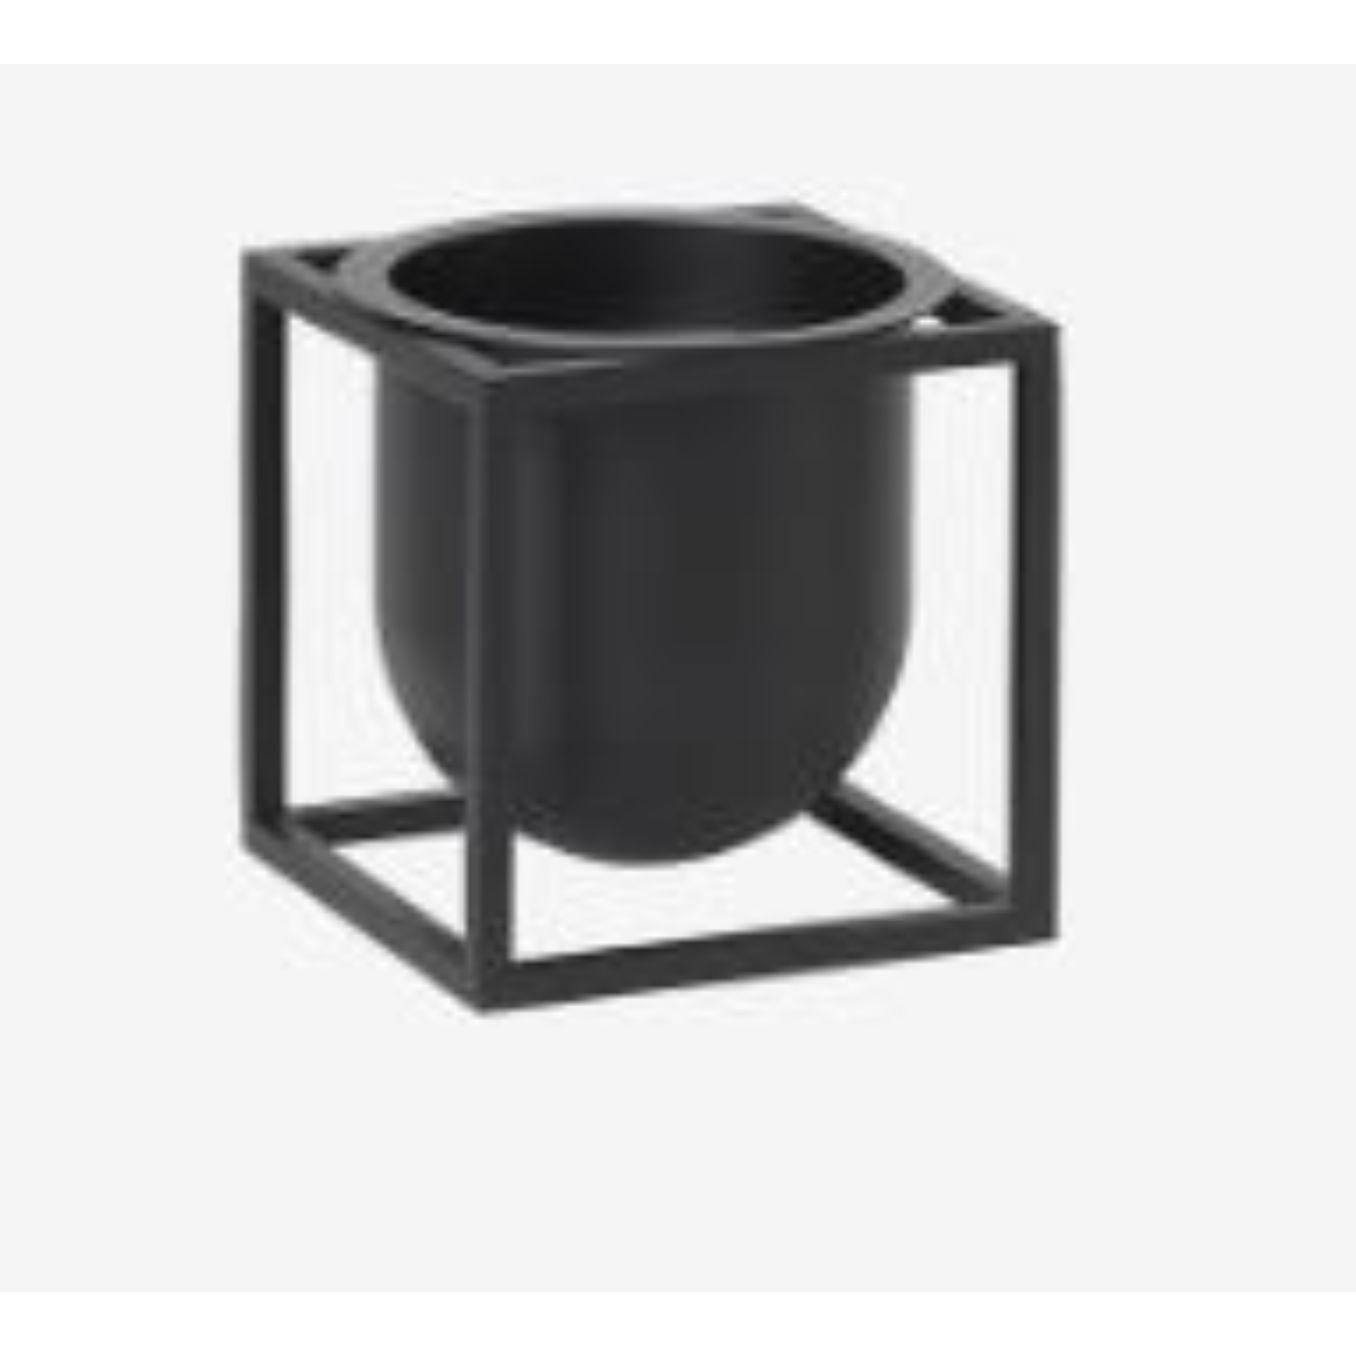 Black flowerpot 14 Kubus vase by Lassen
Dimensions: D 14 x W 14 x H 14 cm 
Materials: Metal 
Weight: 1.39 Kg

Herb pot, vase or a simple container. The possibilities are endless. Another addition to the Kubus collection, Kubus Flowerpots come